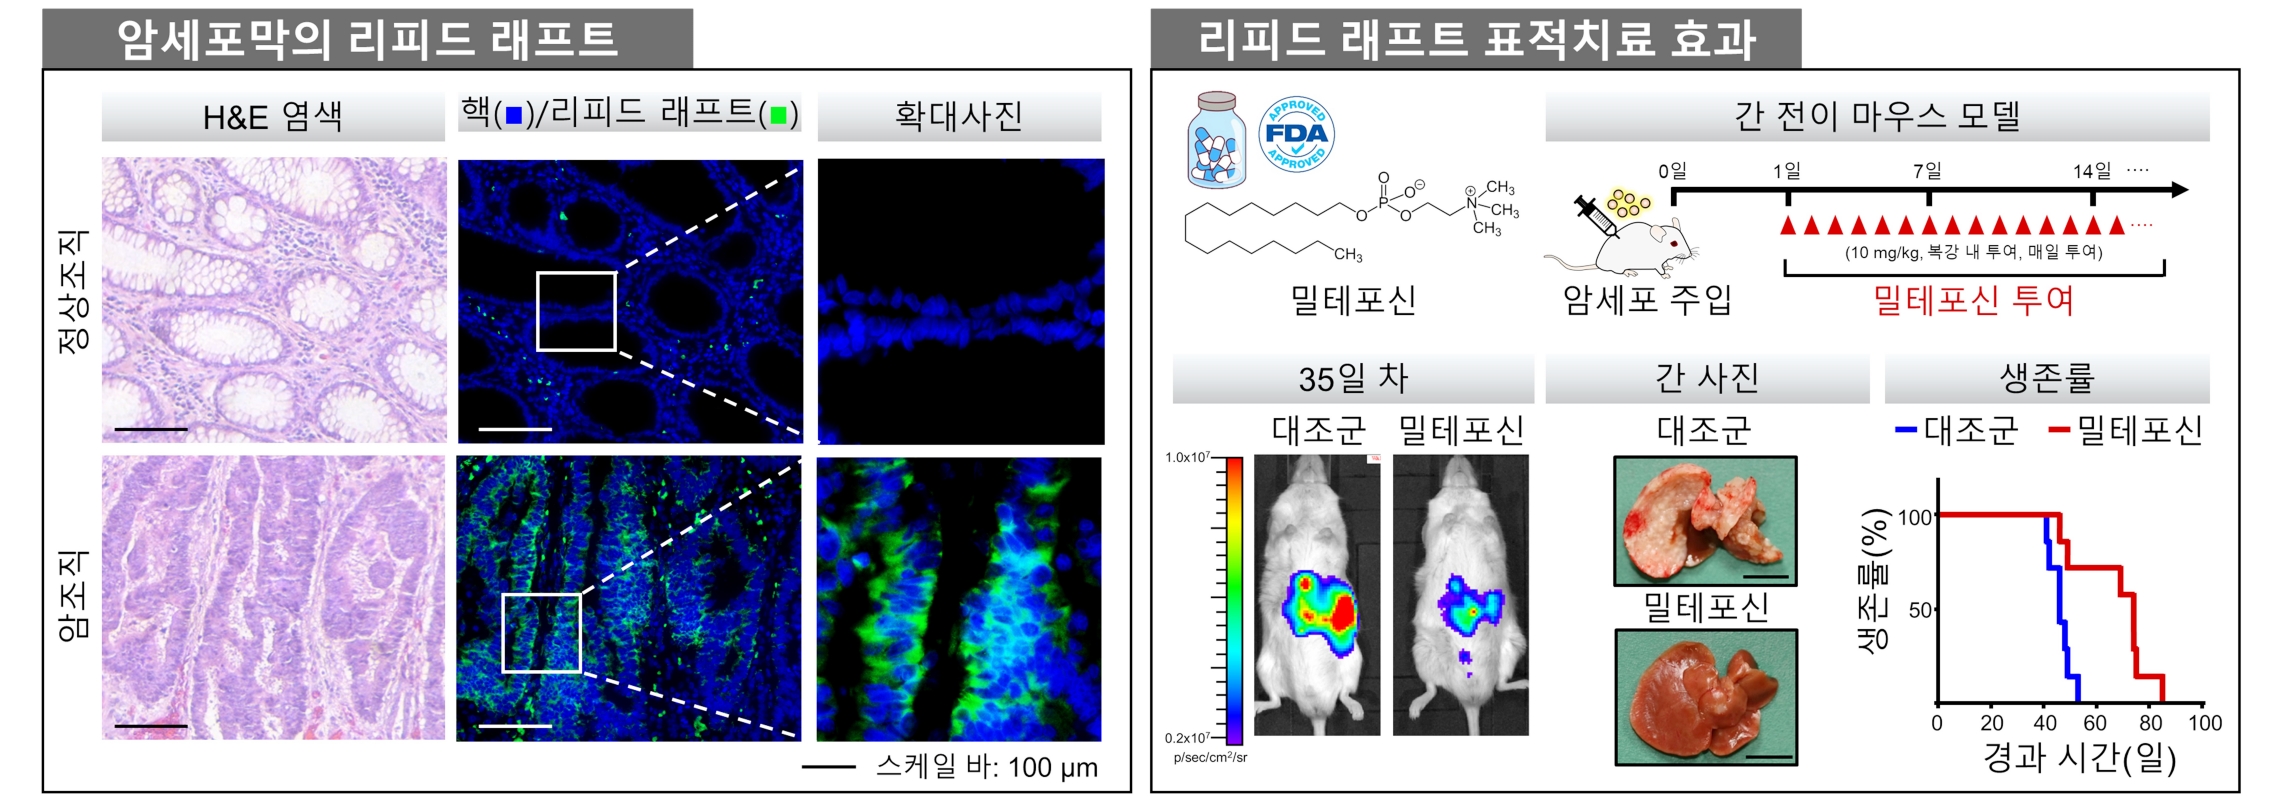 Professor Jeong-Seok Nam's research team discovers principle of how anthelmintic agents act on cancer cell membranes 이미지